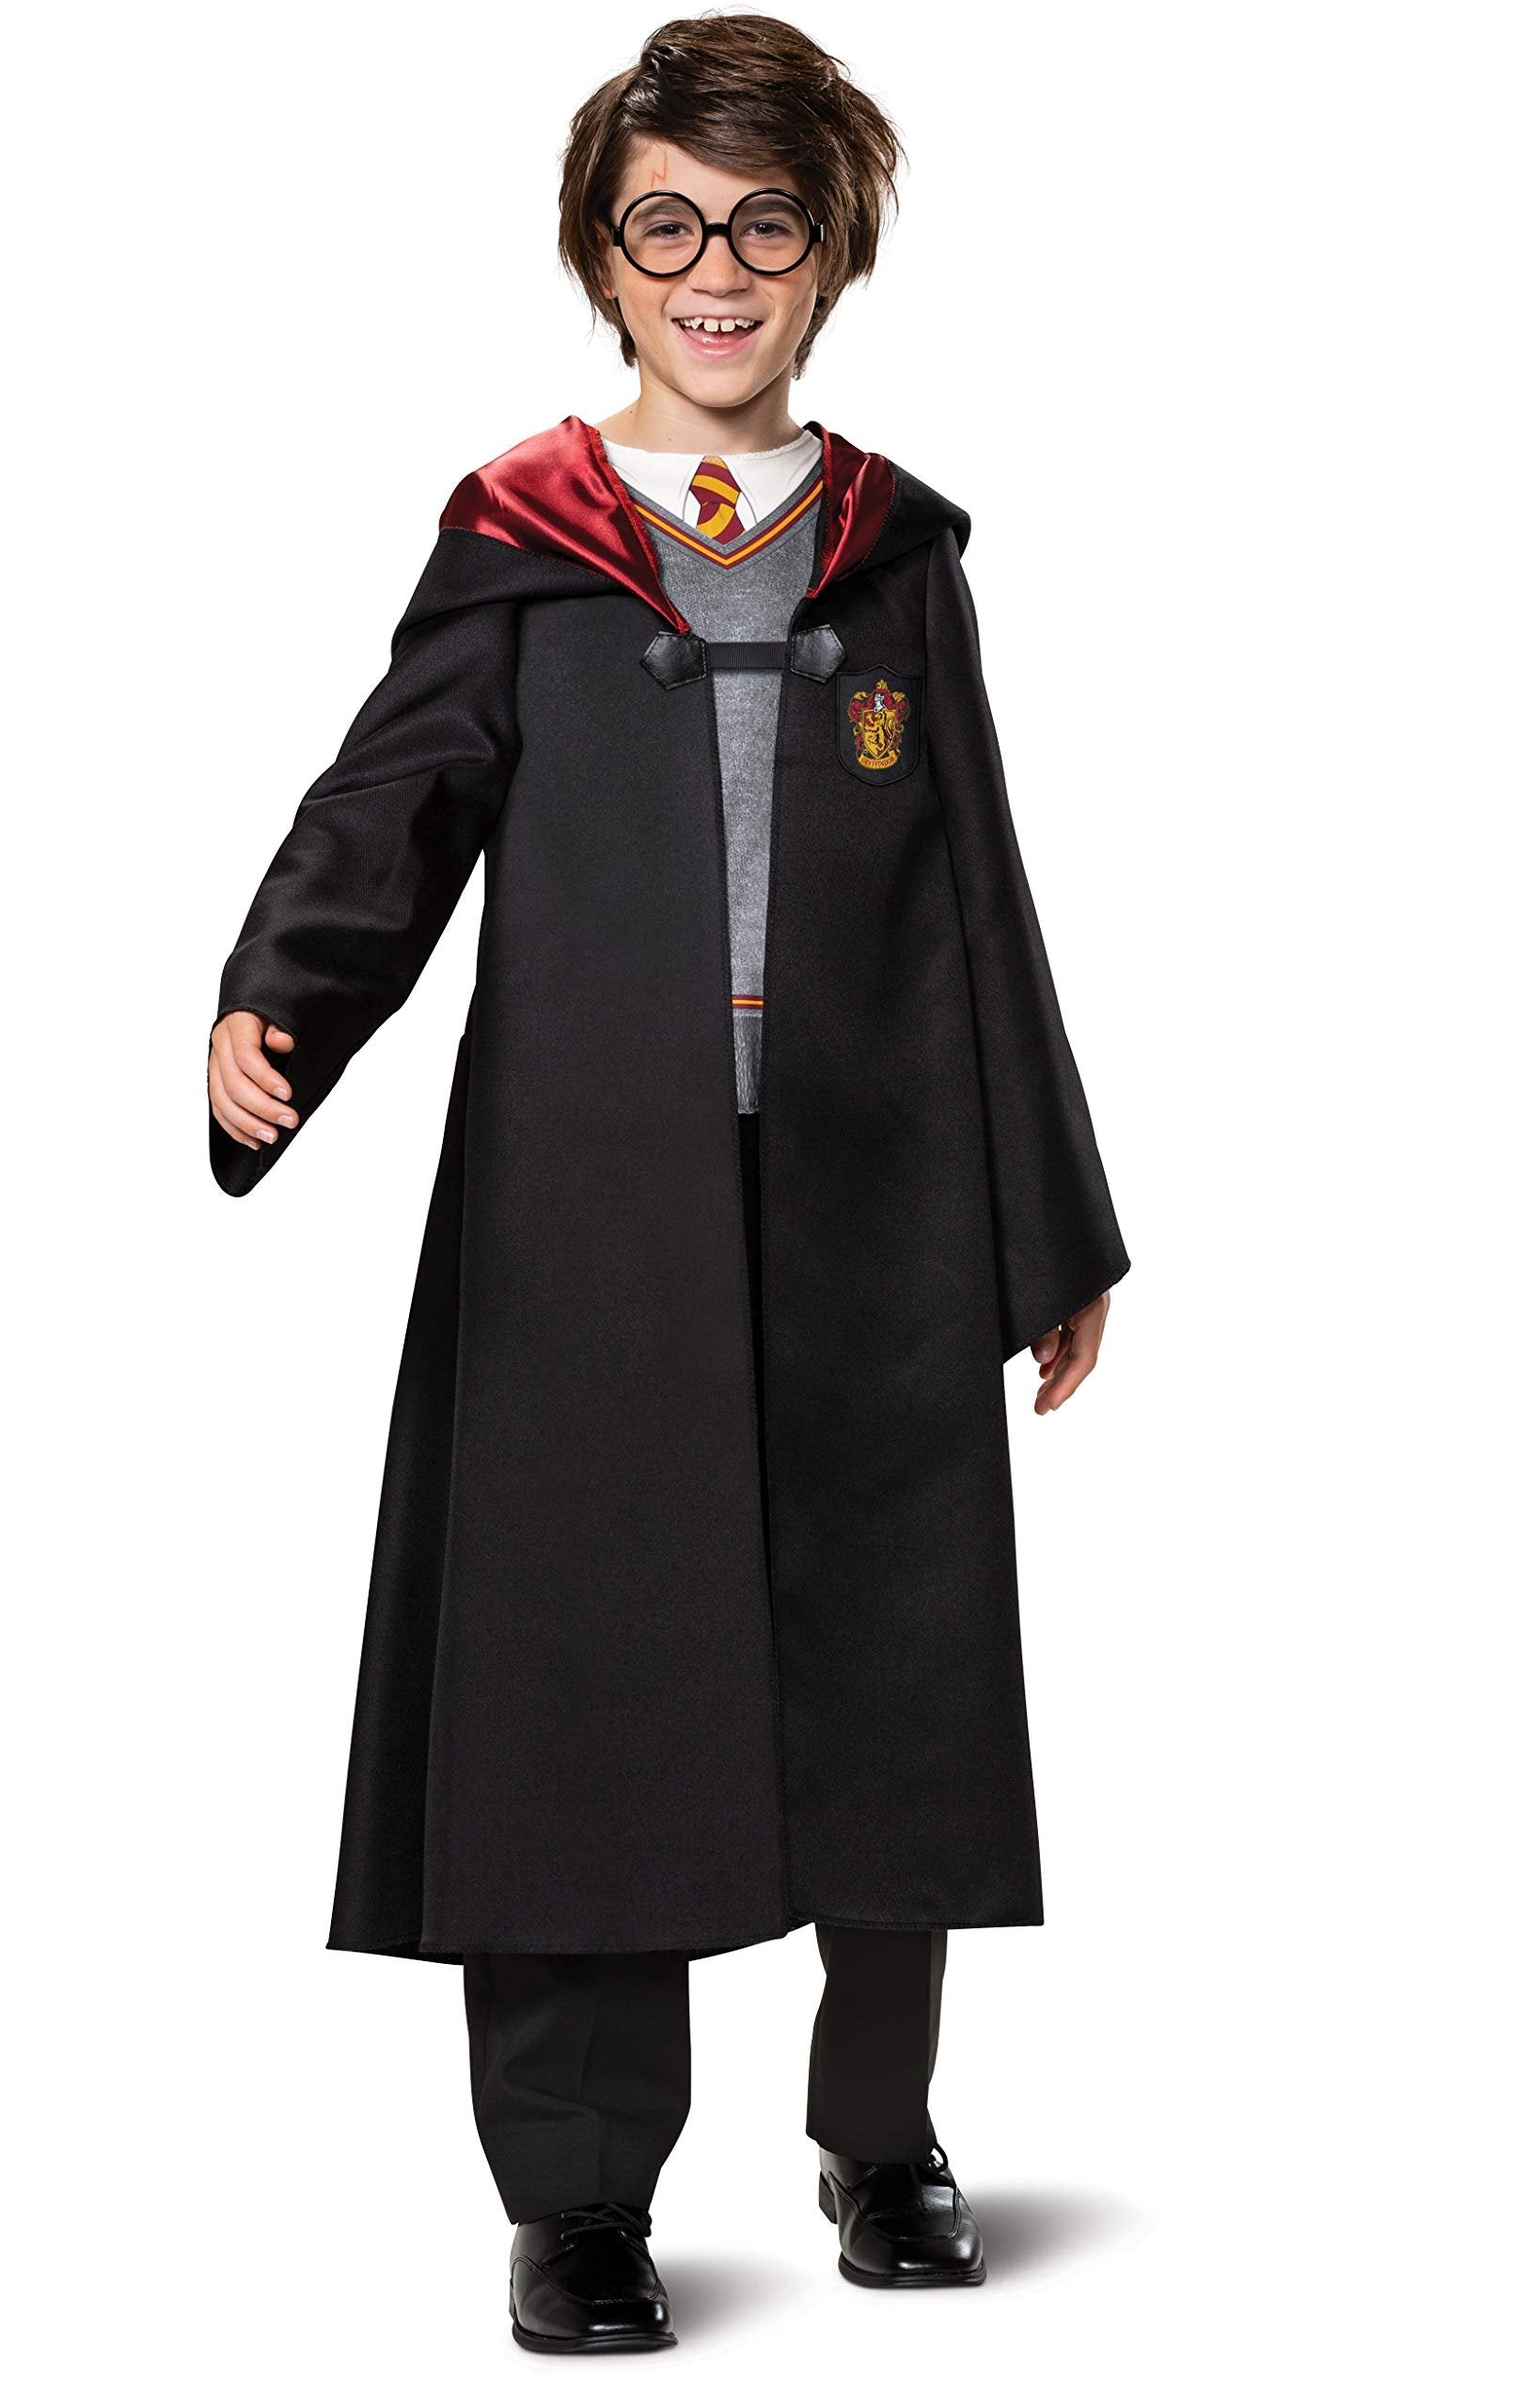 Disguise Harry Potter Costume for Kids, Classic Boys Outfit, Children Size Medium (7-8), Black & Red (107519K)